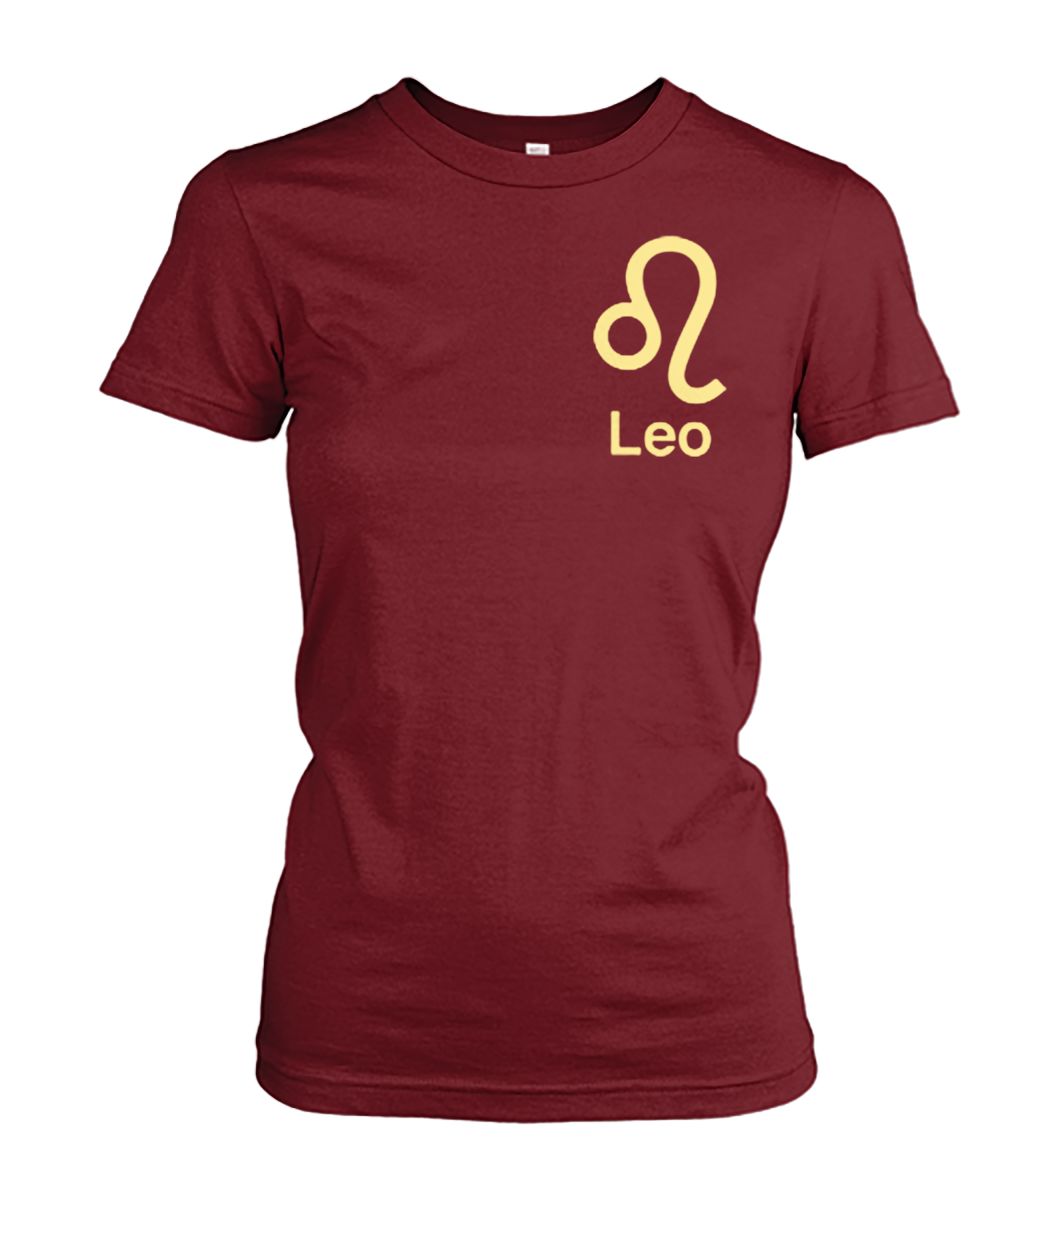 Leo is the fifth sign of the zodiac women's crew tee